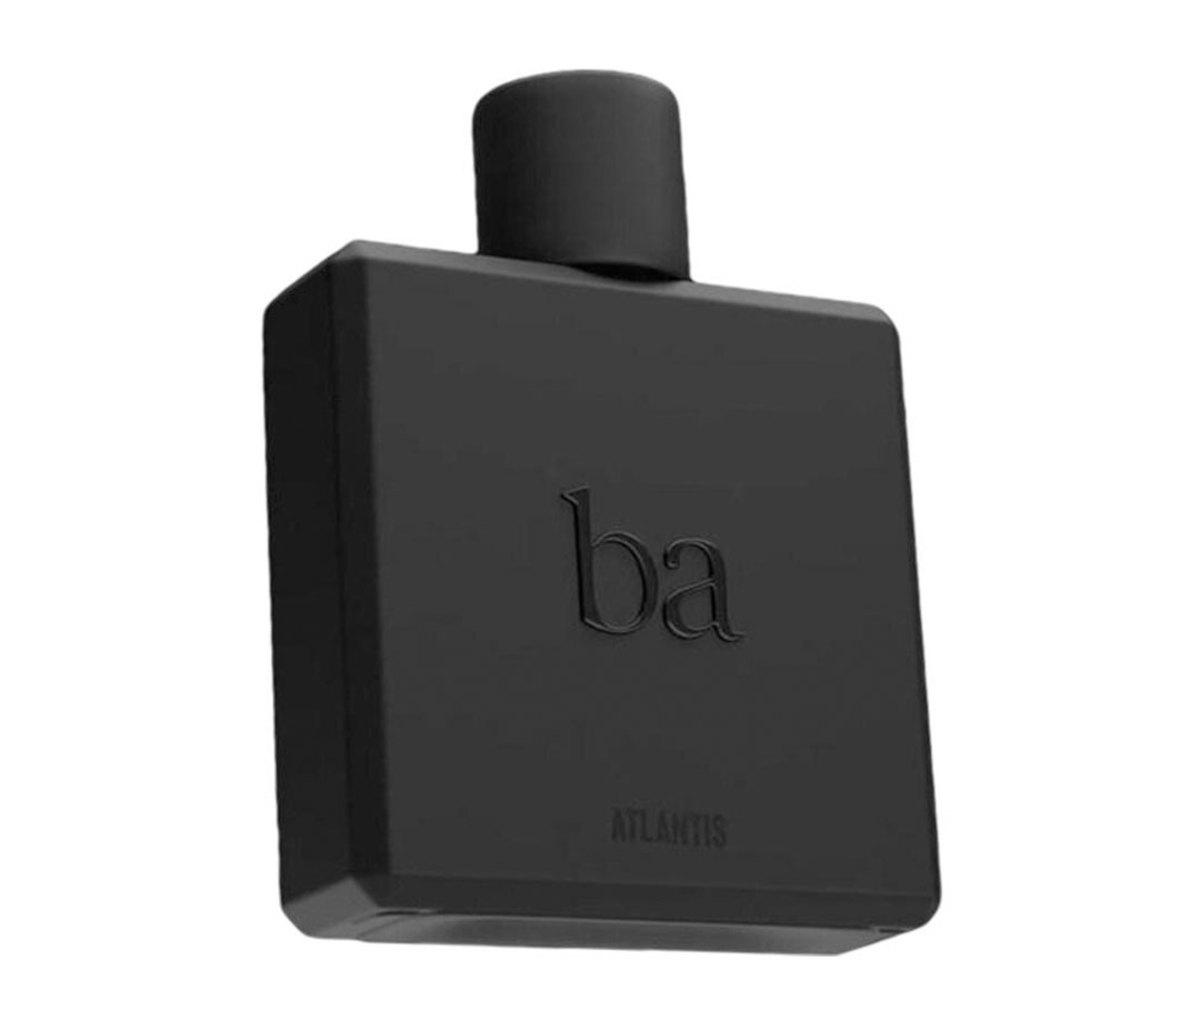 23 Best Everyday Colognes for Men - Sports Illustrated